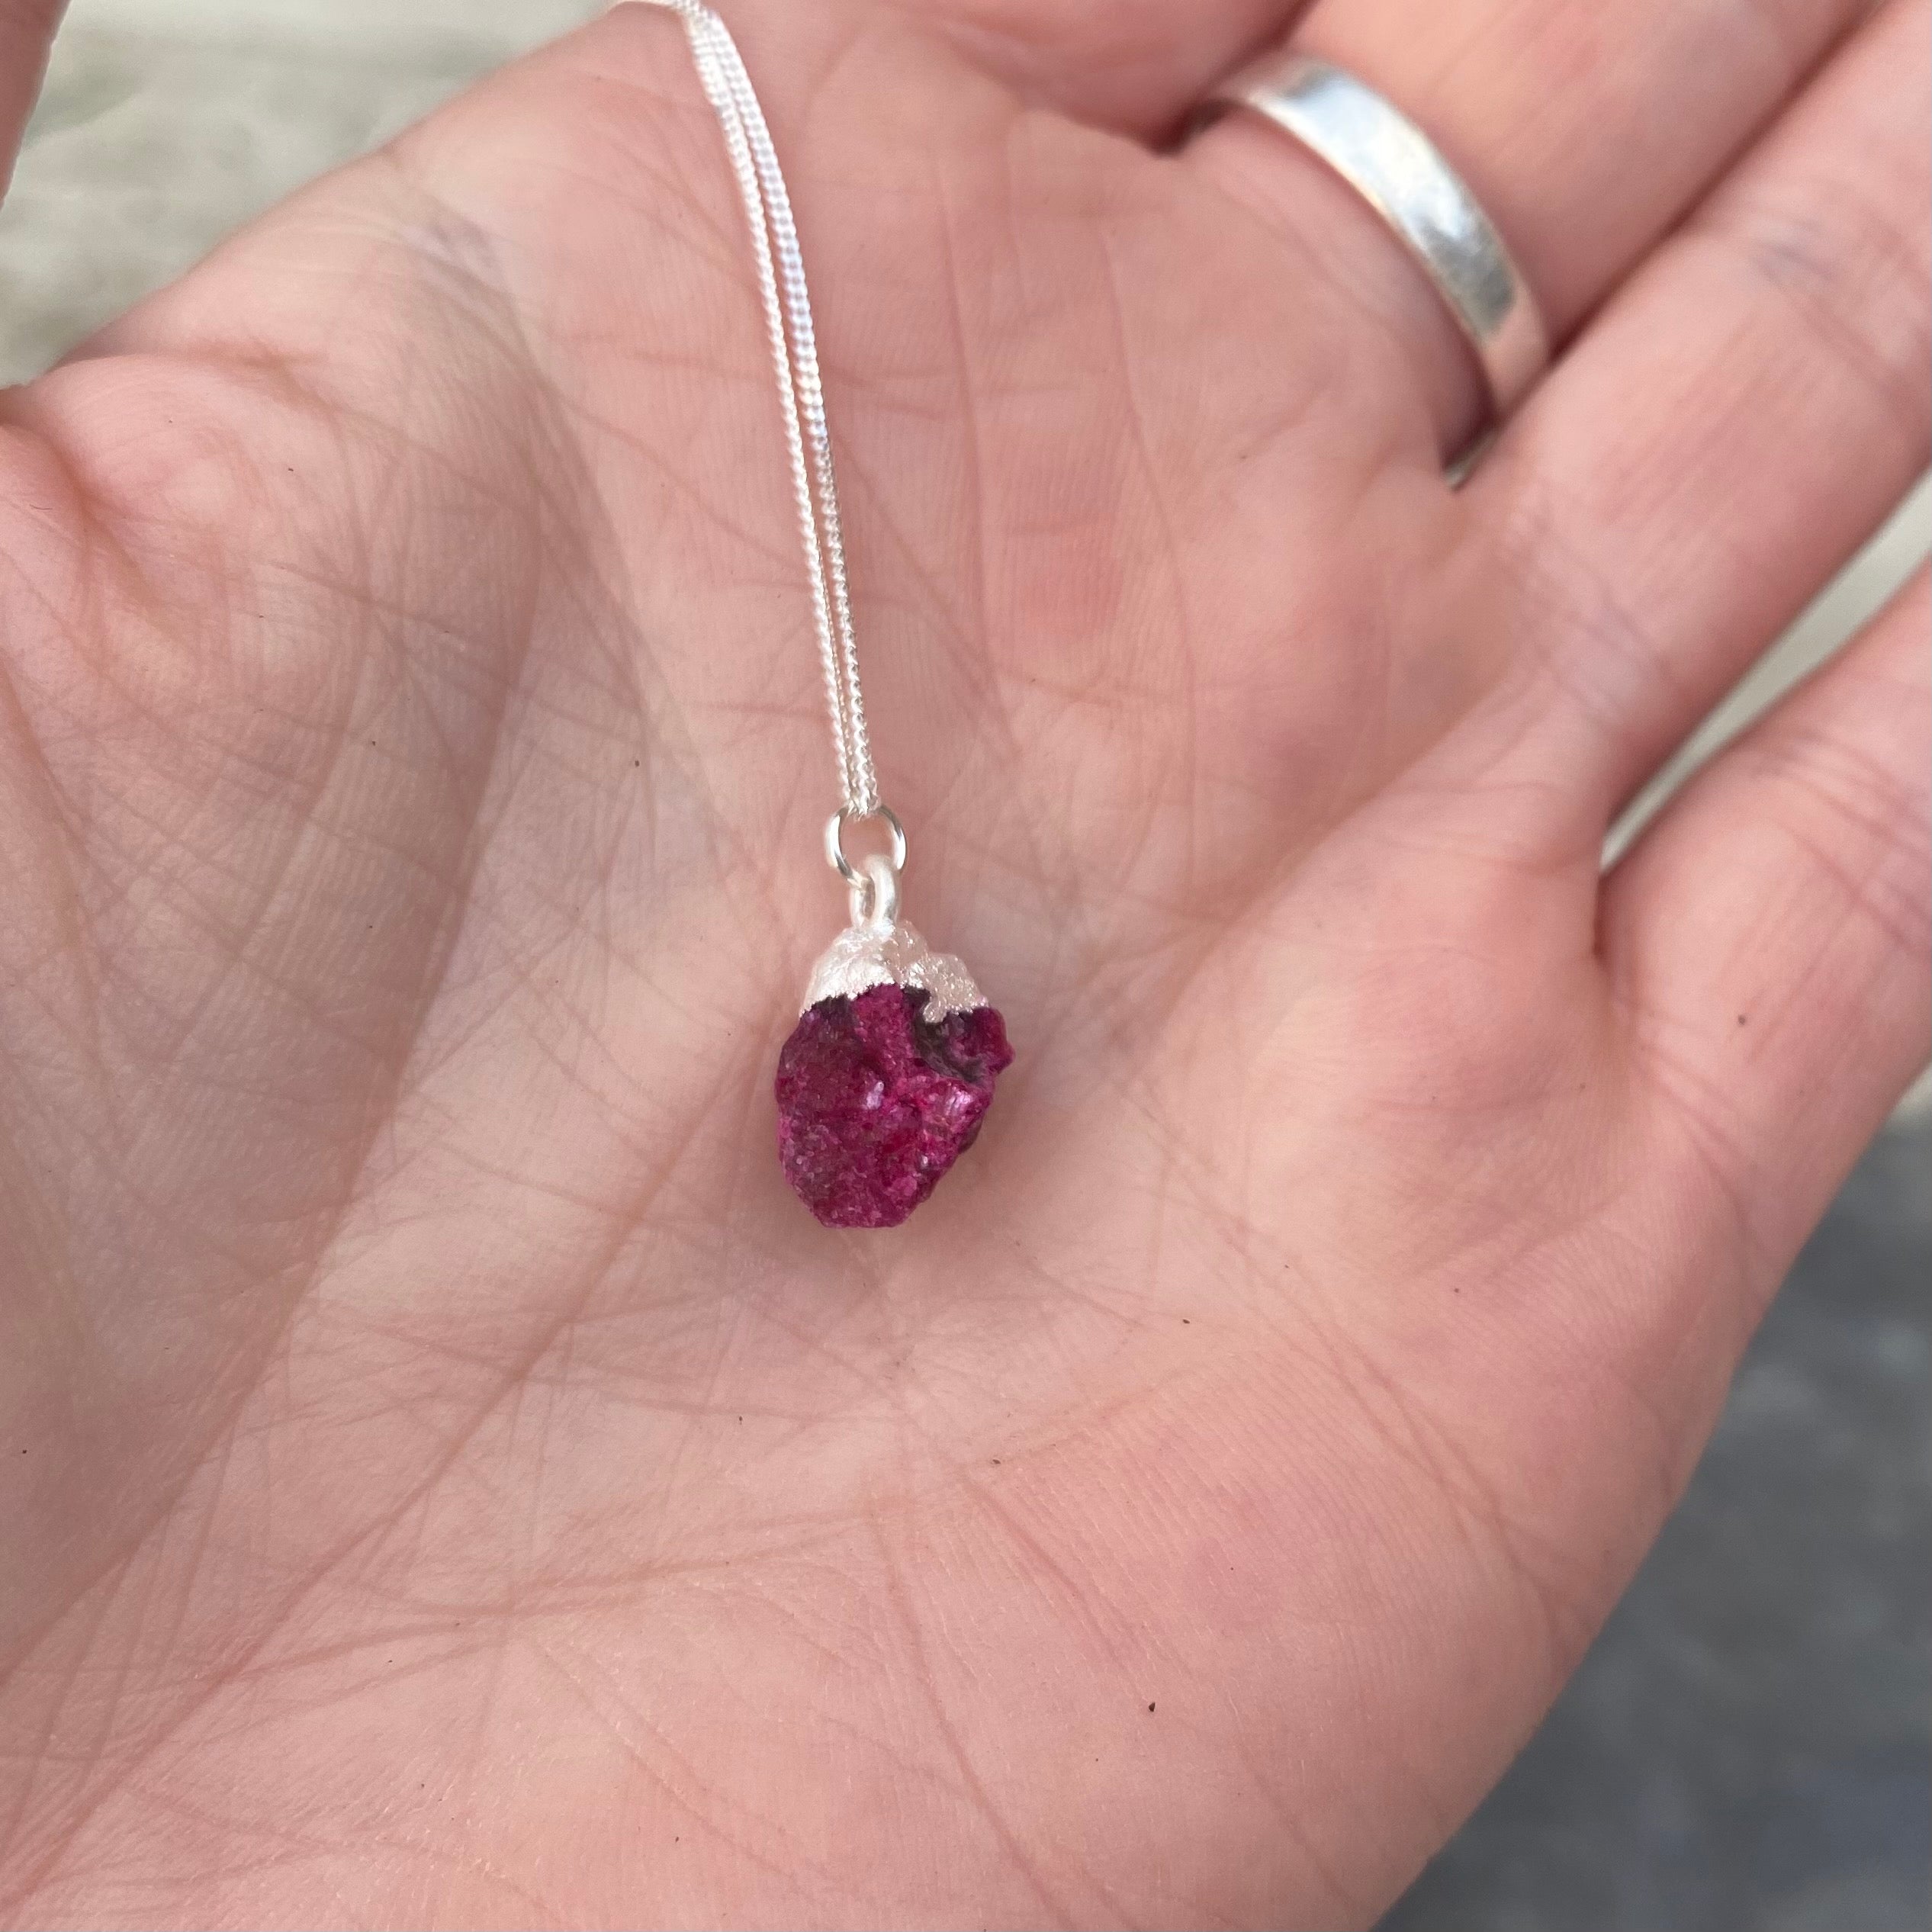 Birthstone Necklace - Raw Crystal and Sterling Silver July Ruby 18"